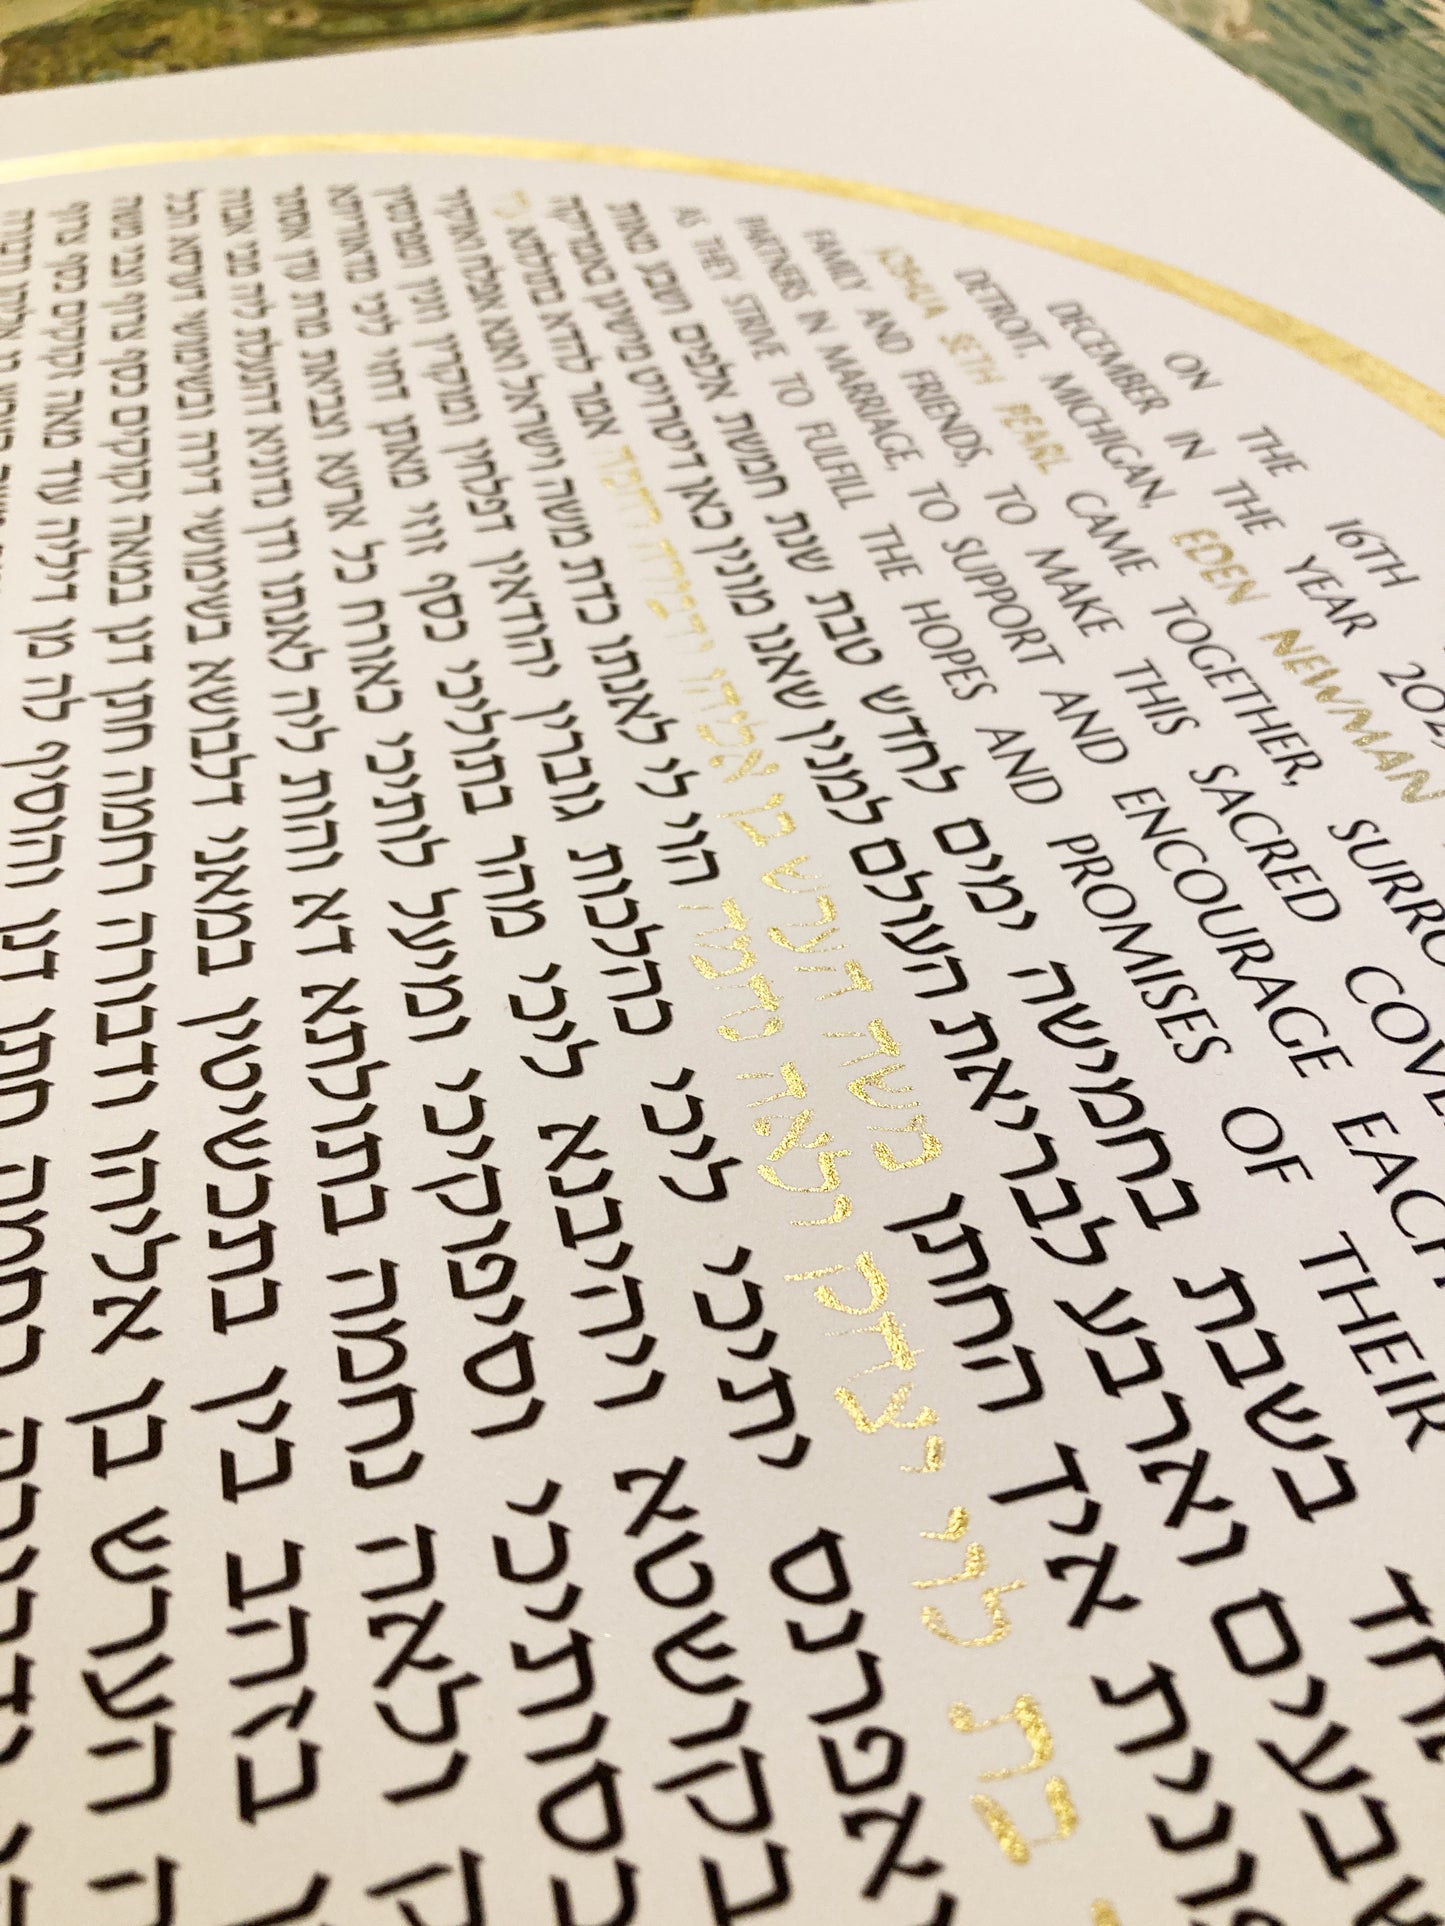 Simple Gold Ring giclée Ketubah >< with Hand Writing in gold paint for bride and groom's names